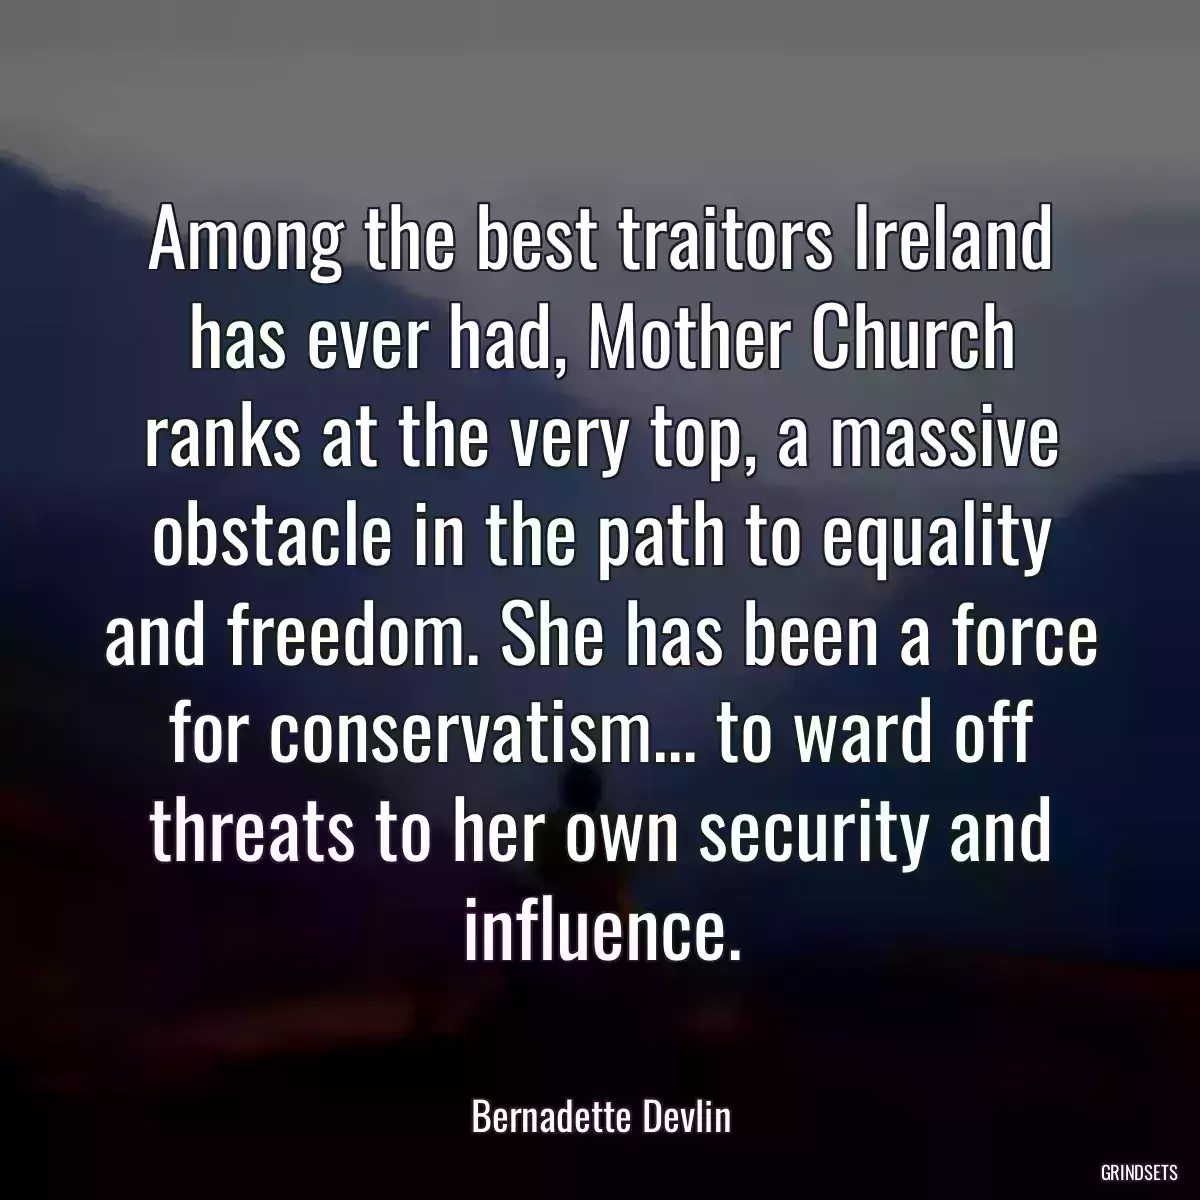 Among the best traitors Ireland has ever had, Mother Church ranks at the very top, a massive obstacle in the path to equality and freedom. She has been a force for conservatism... to ward off threats to her own security and influence.